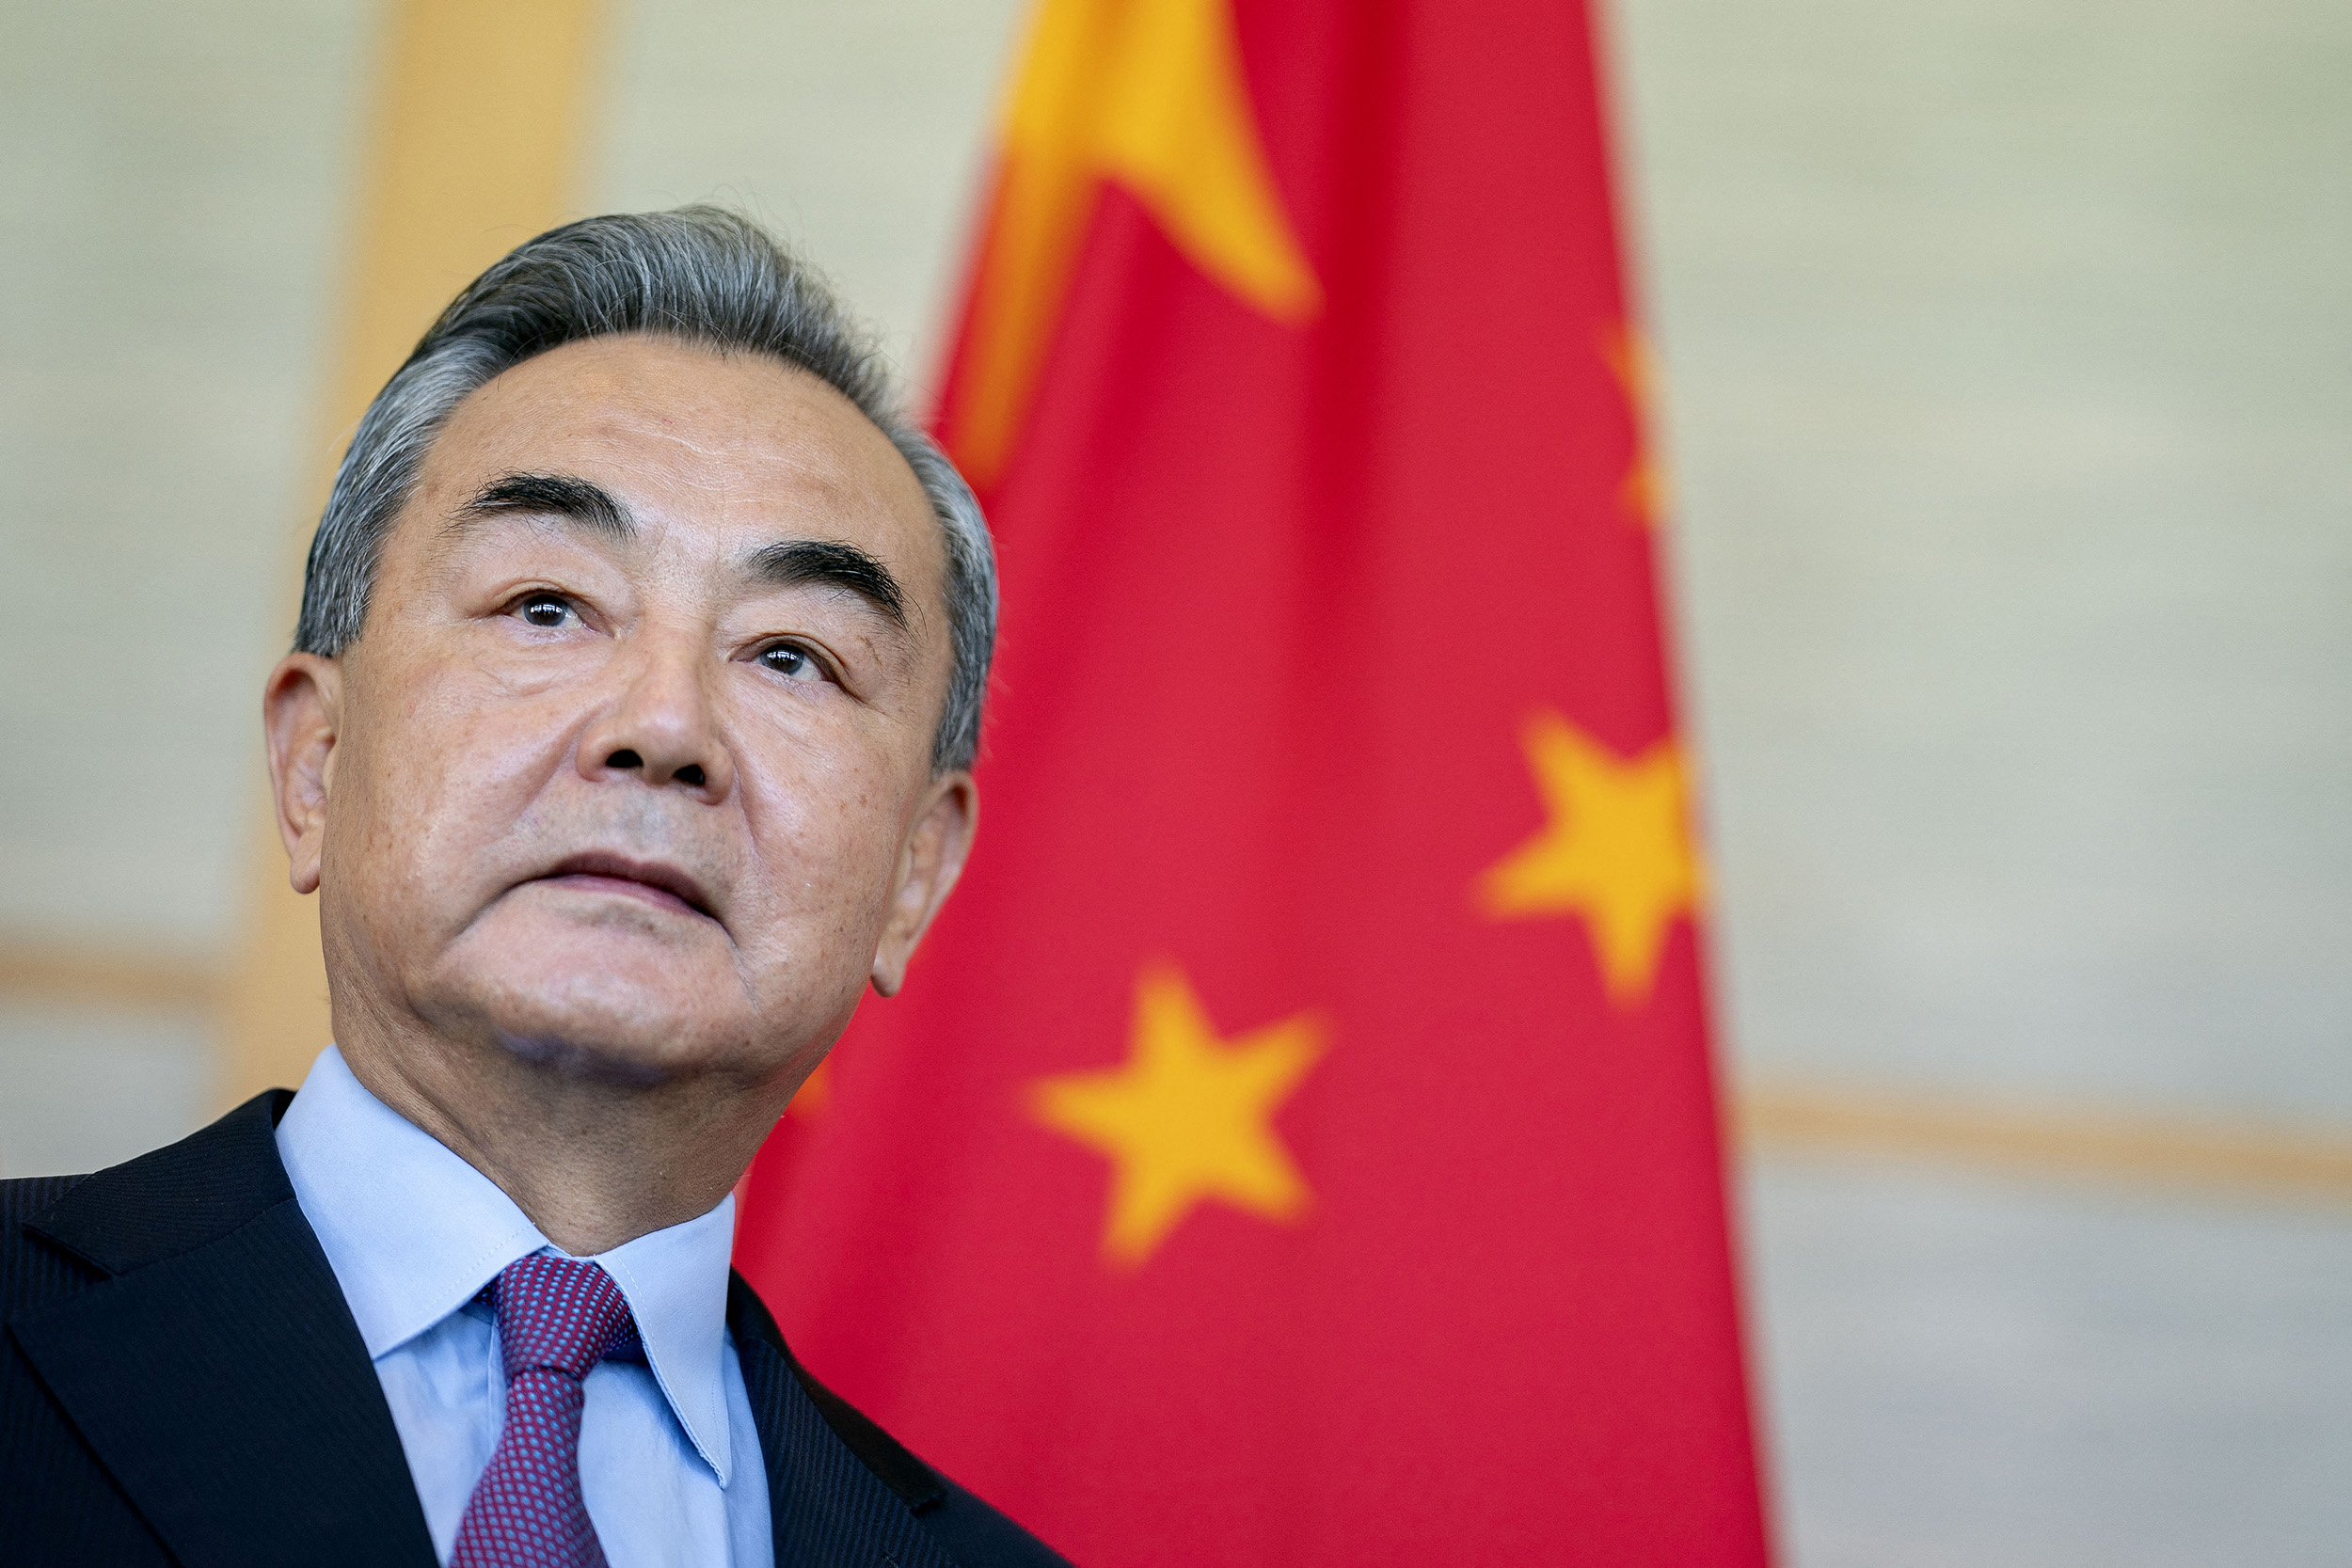 China's Foreign Minister Wang Yi attends a meeting in Bali, Indonesia on July 9.